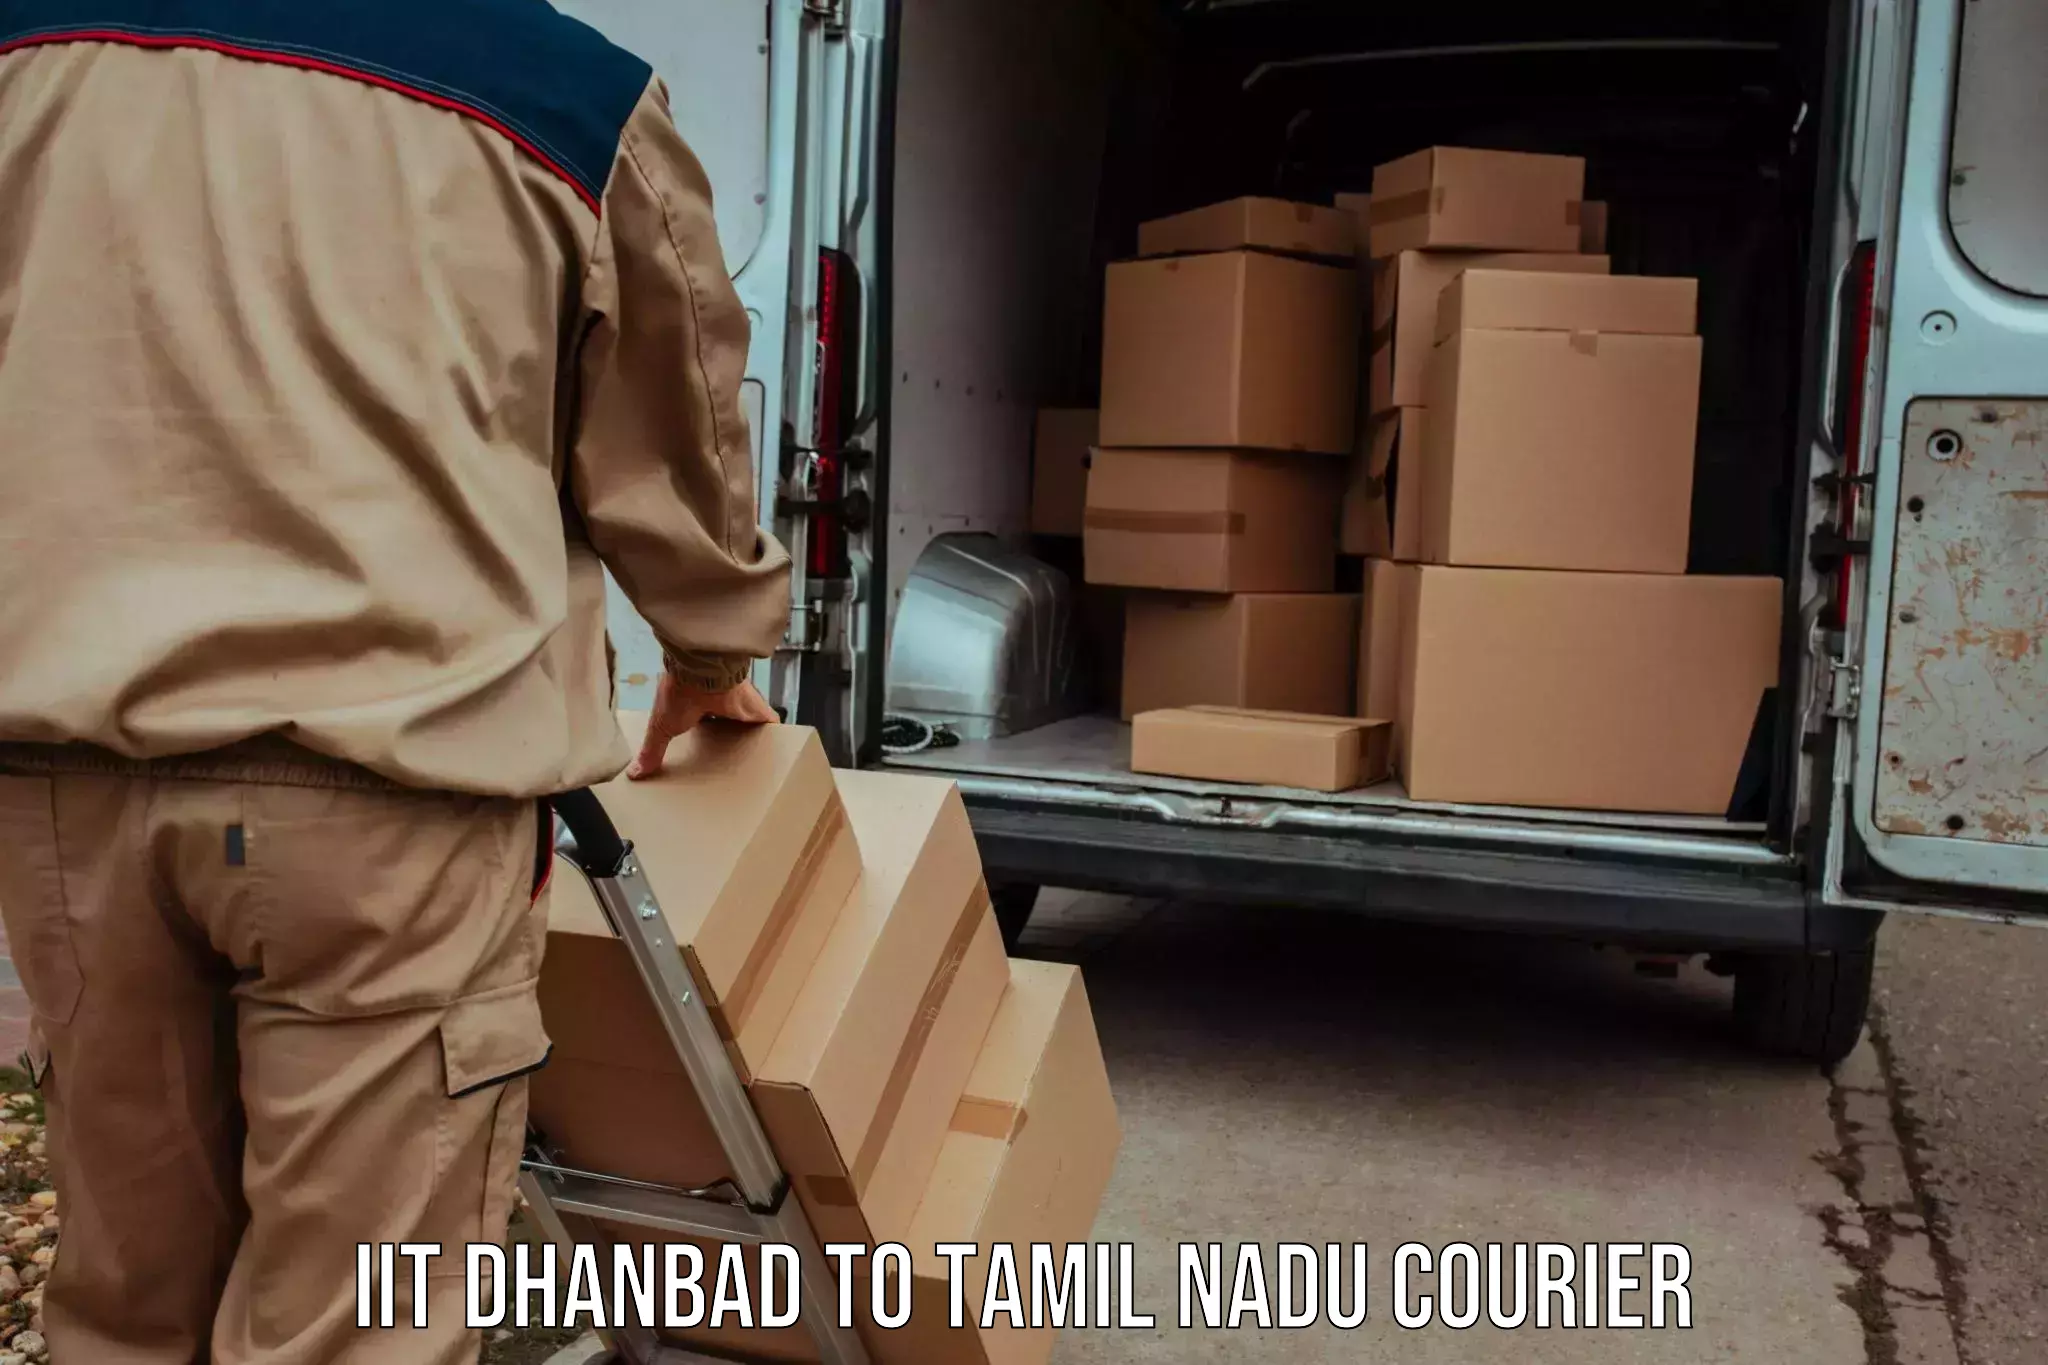 Courier service partnerships IIT Dhanbad to Tiruchengode